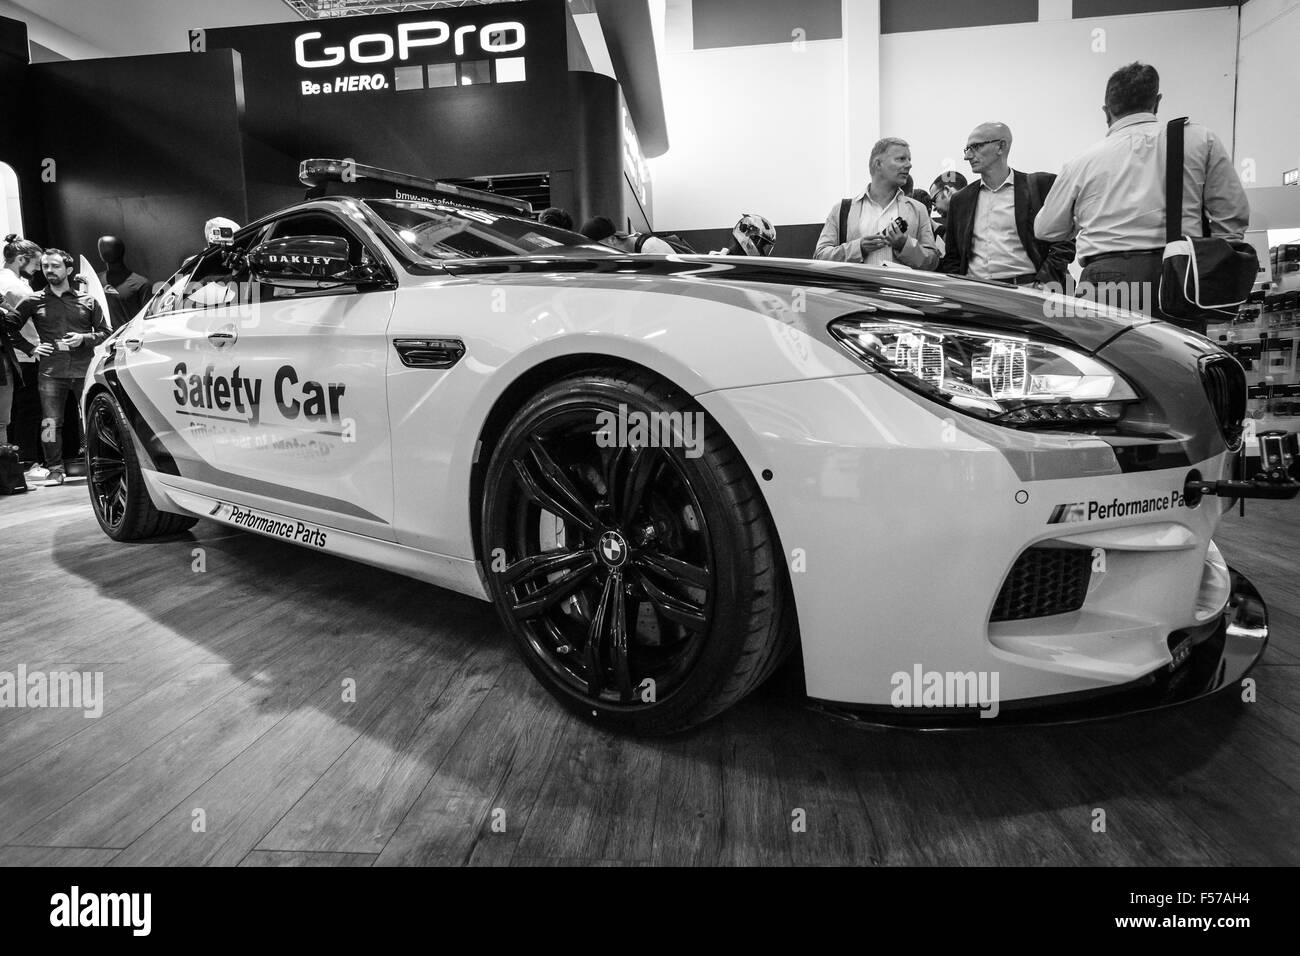 In stand by GoPro. Safety Car BMW M4 Coupe DTM. In bianco e nero. Radio internazionale mostra Berlino (IFA2015). Foto Stock